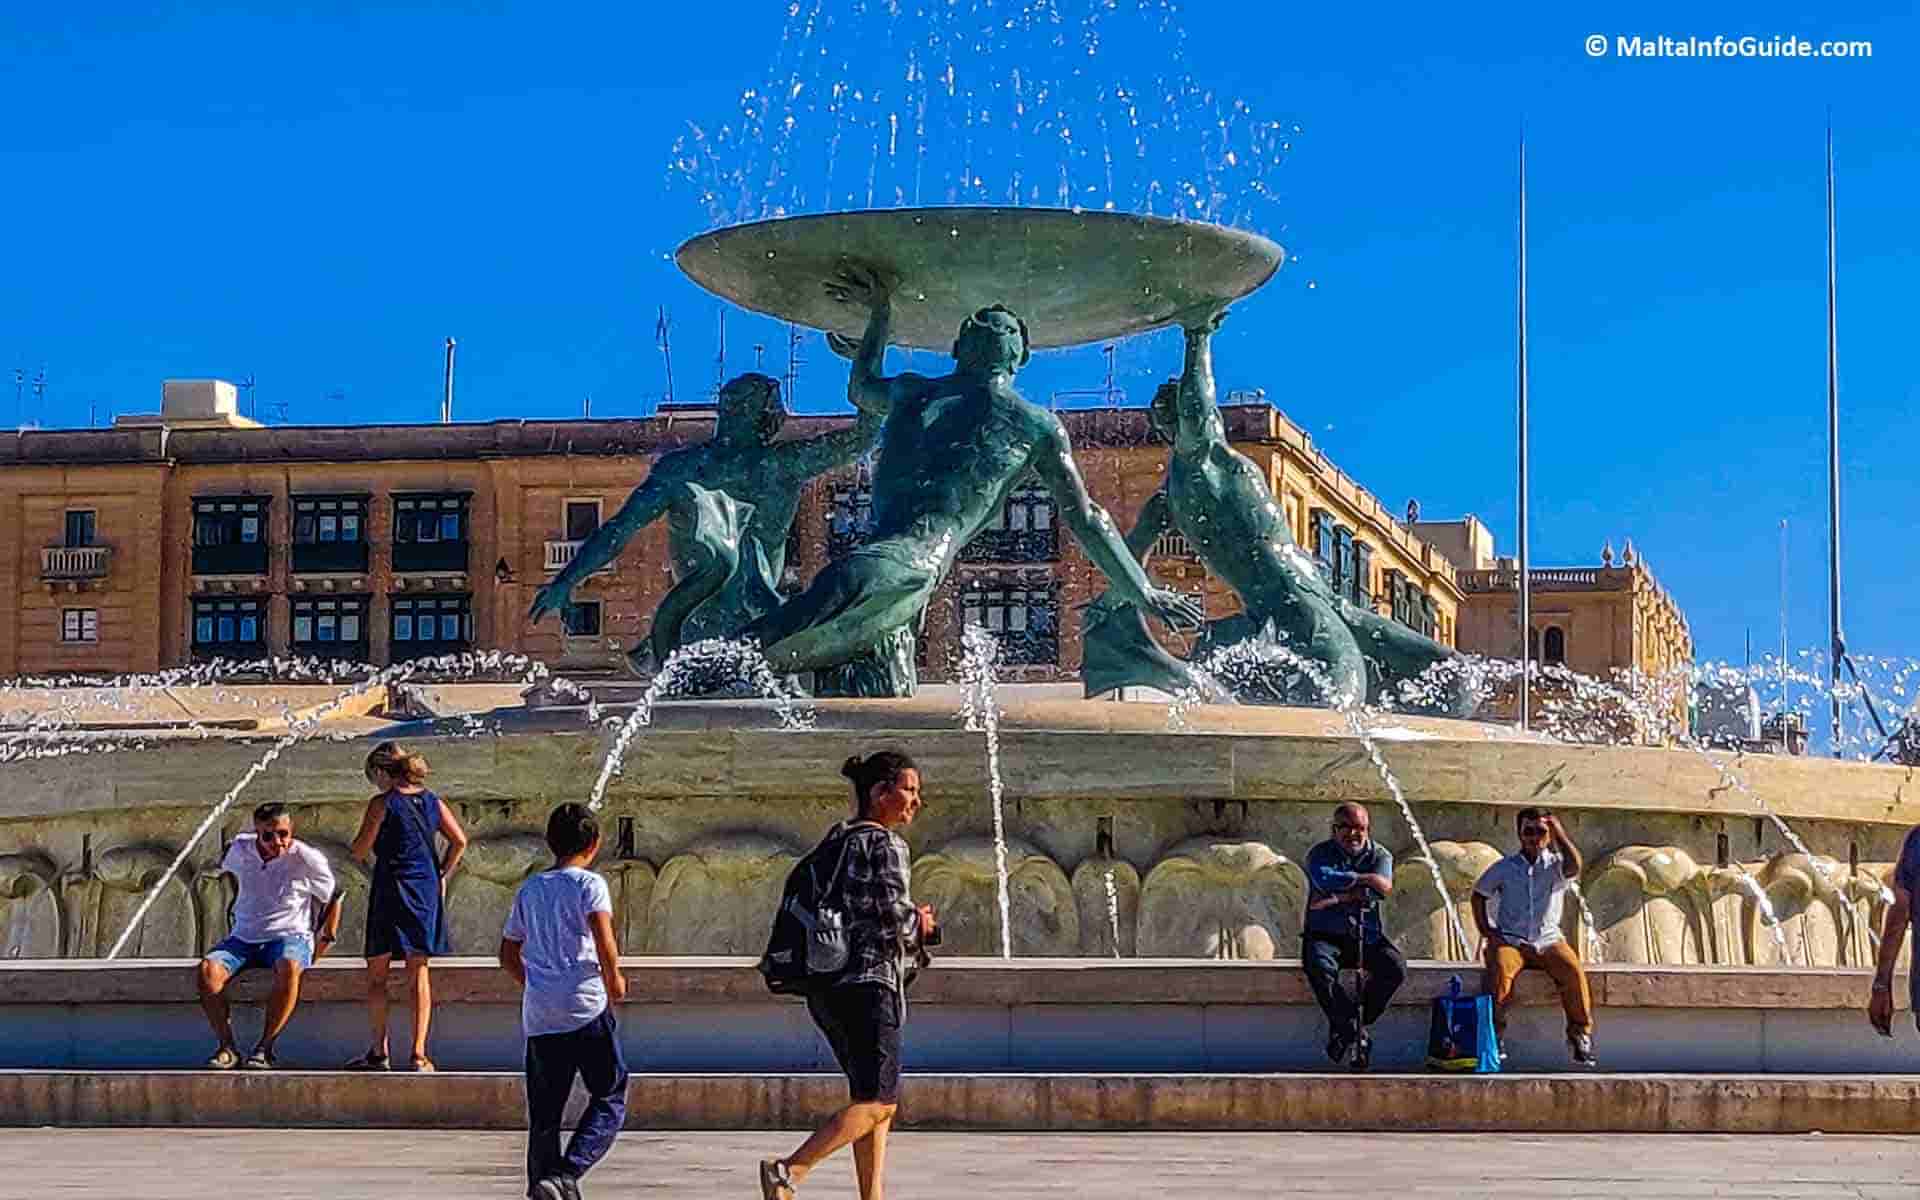 People walking past the Triton fountain just before entering the city of Valletta.